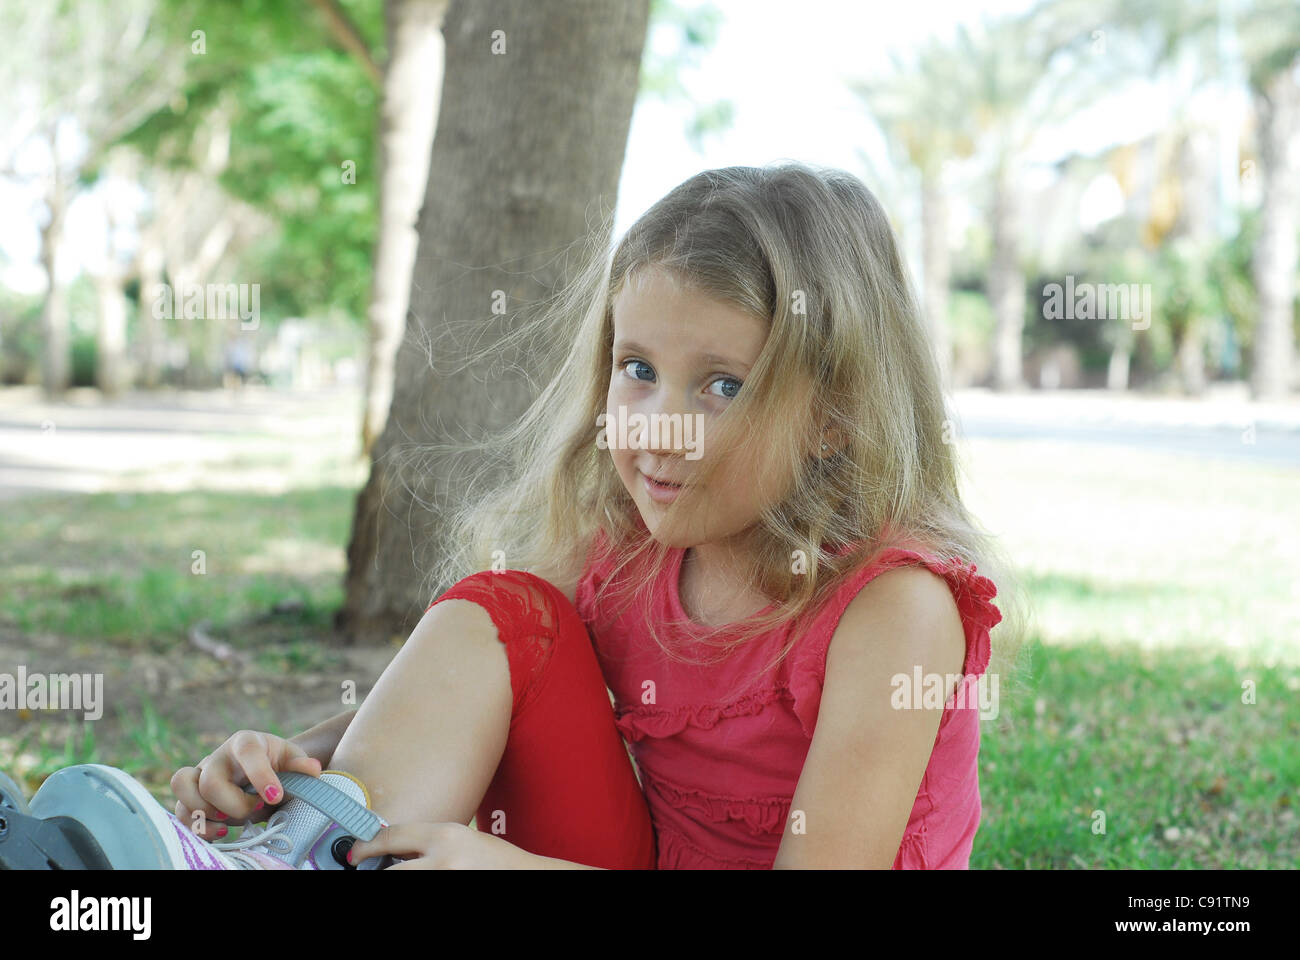 children girl dress blond movies in the park Stock Photo